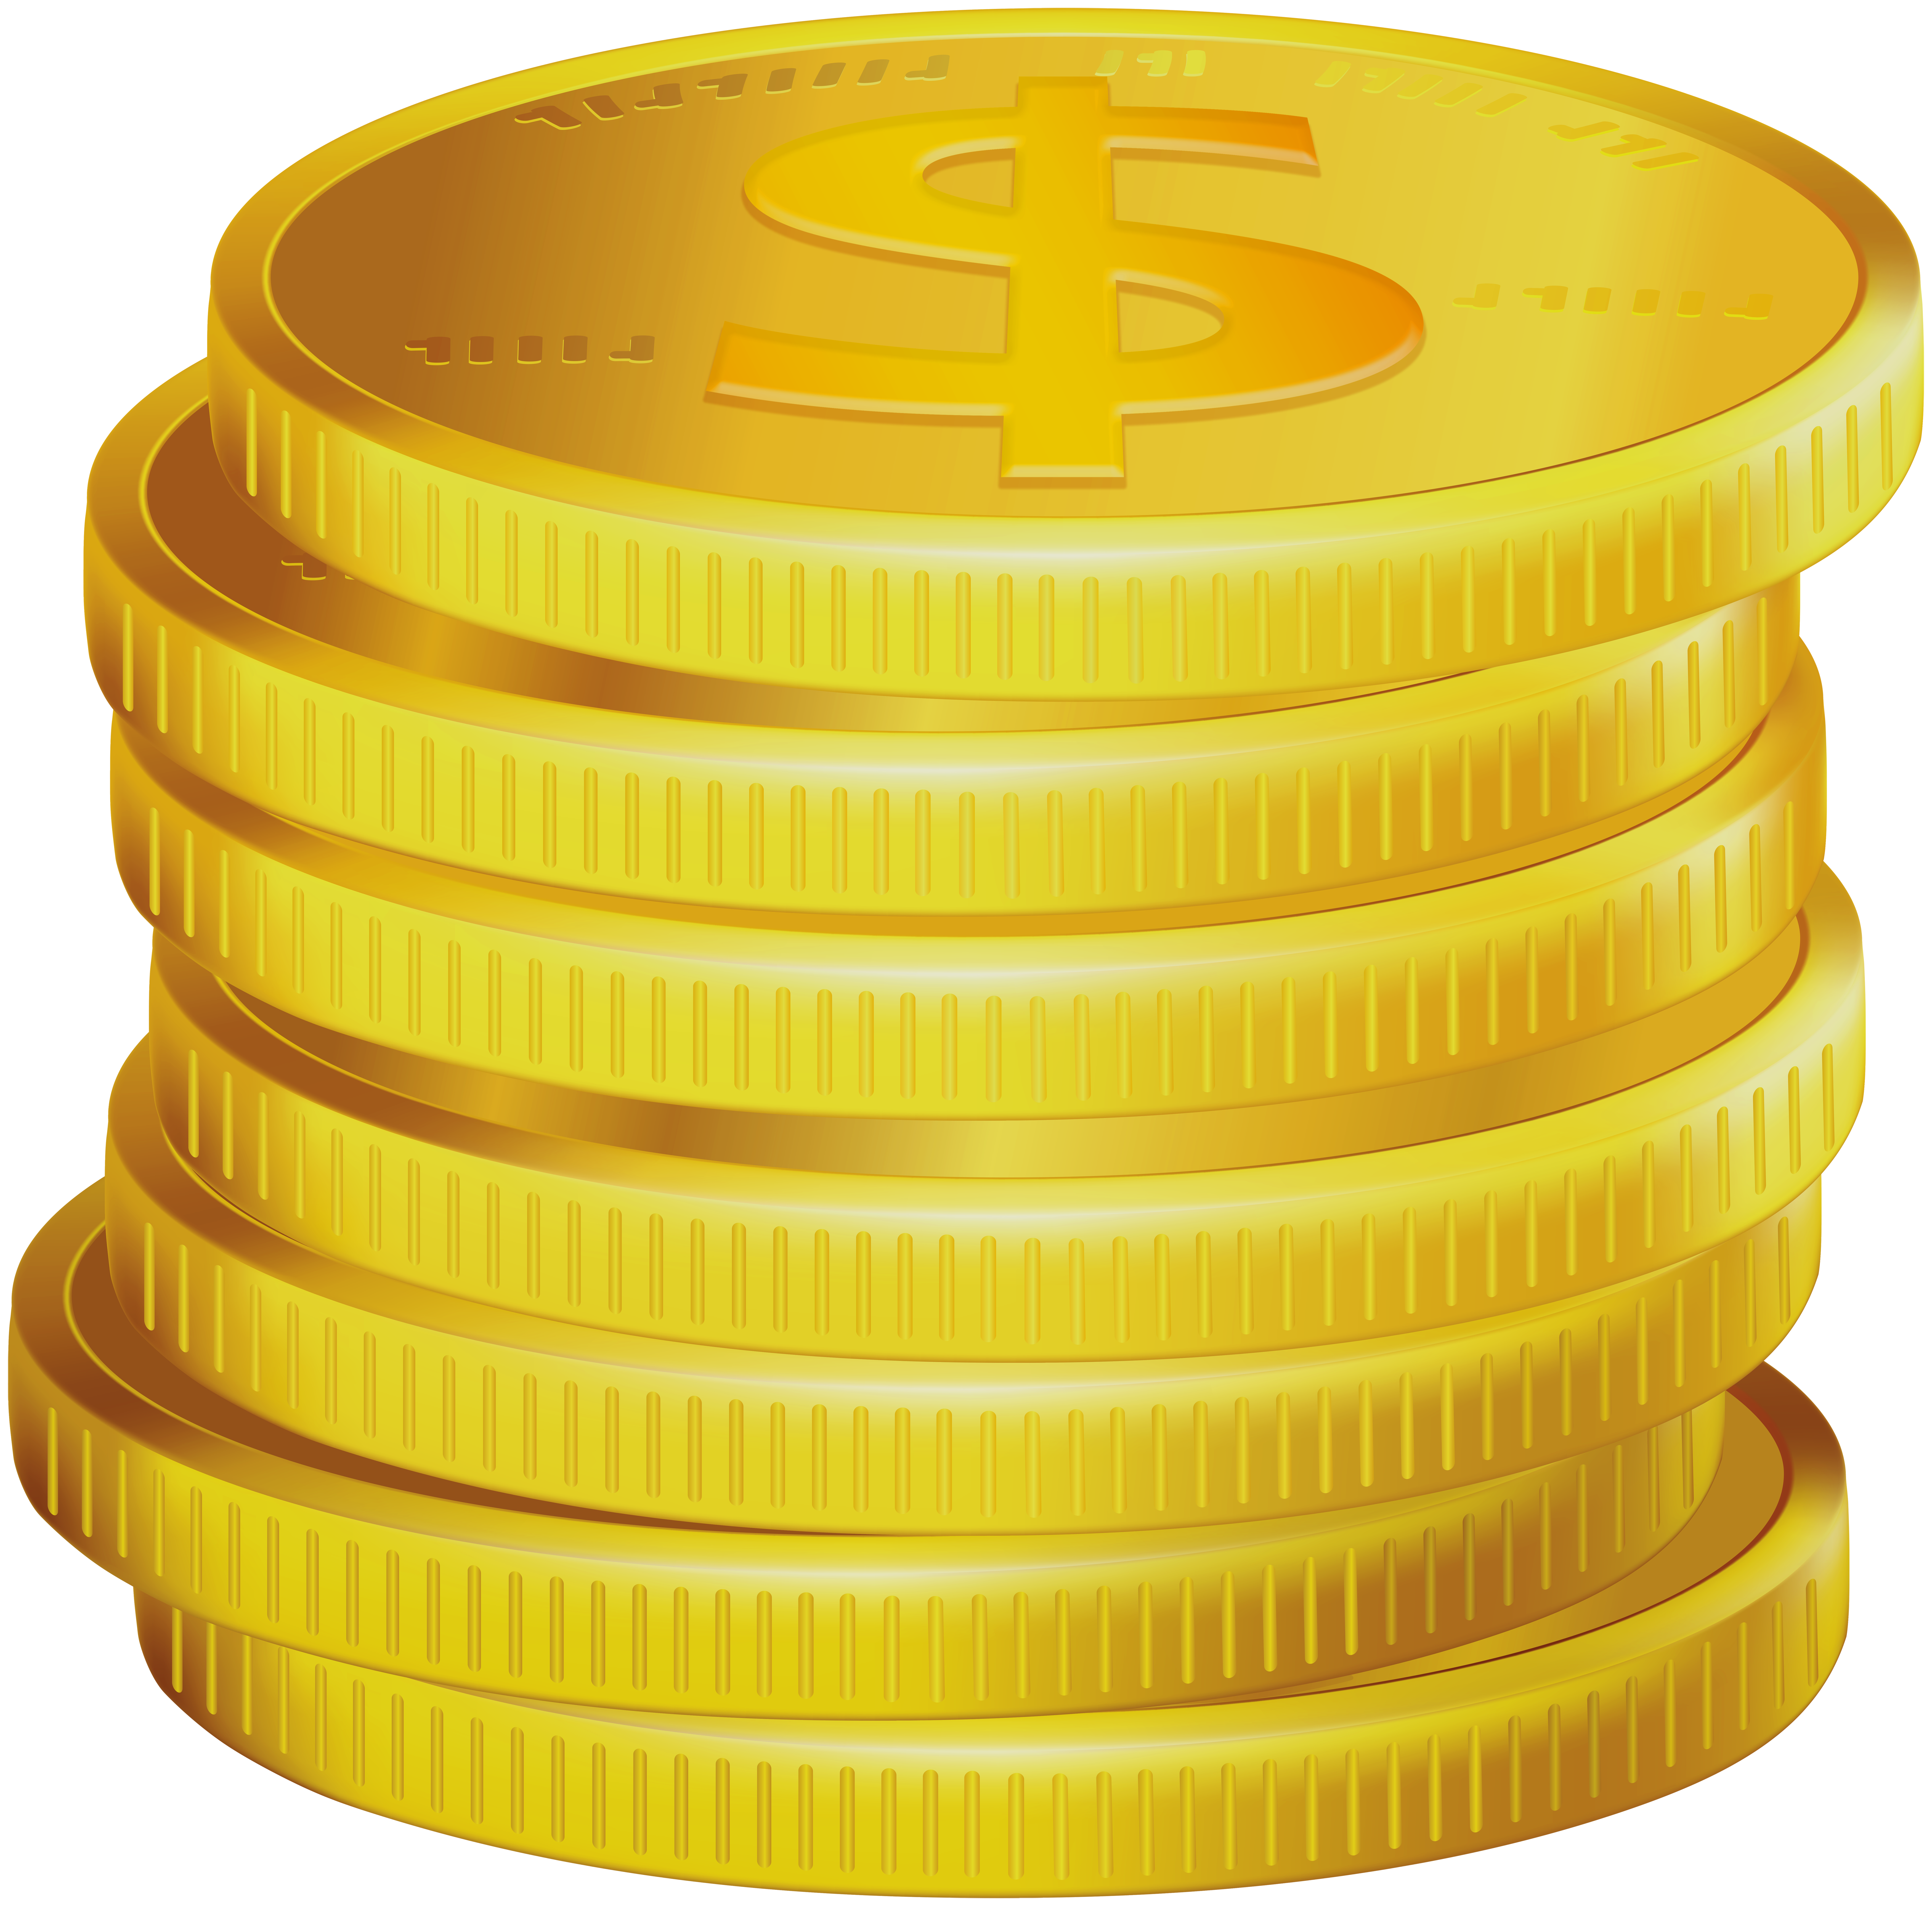 Network Vector Portable Coin Graphics Free Download Image PNG Image. 